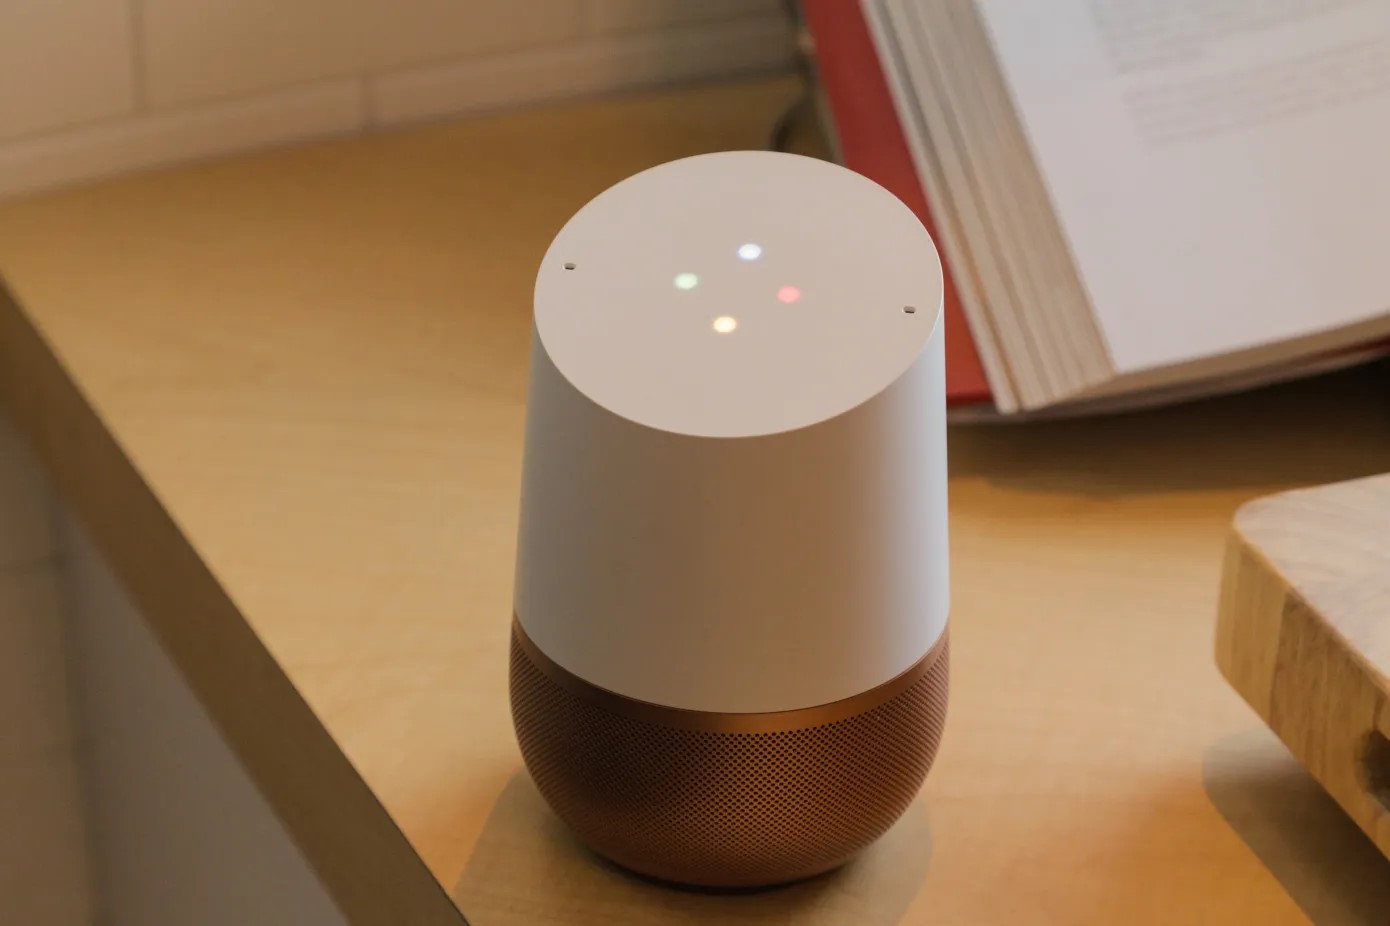 How To Set Up Routines On Google Home